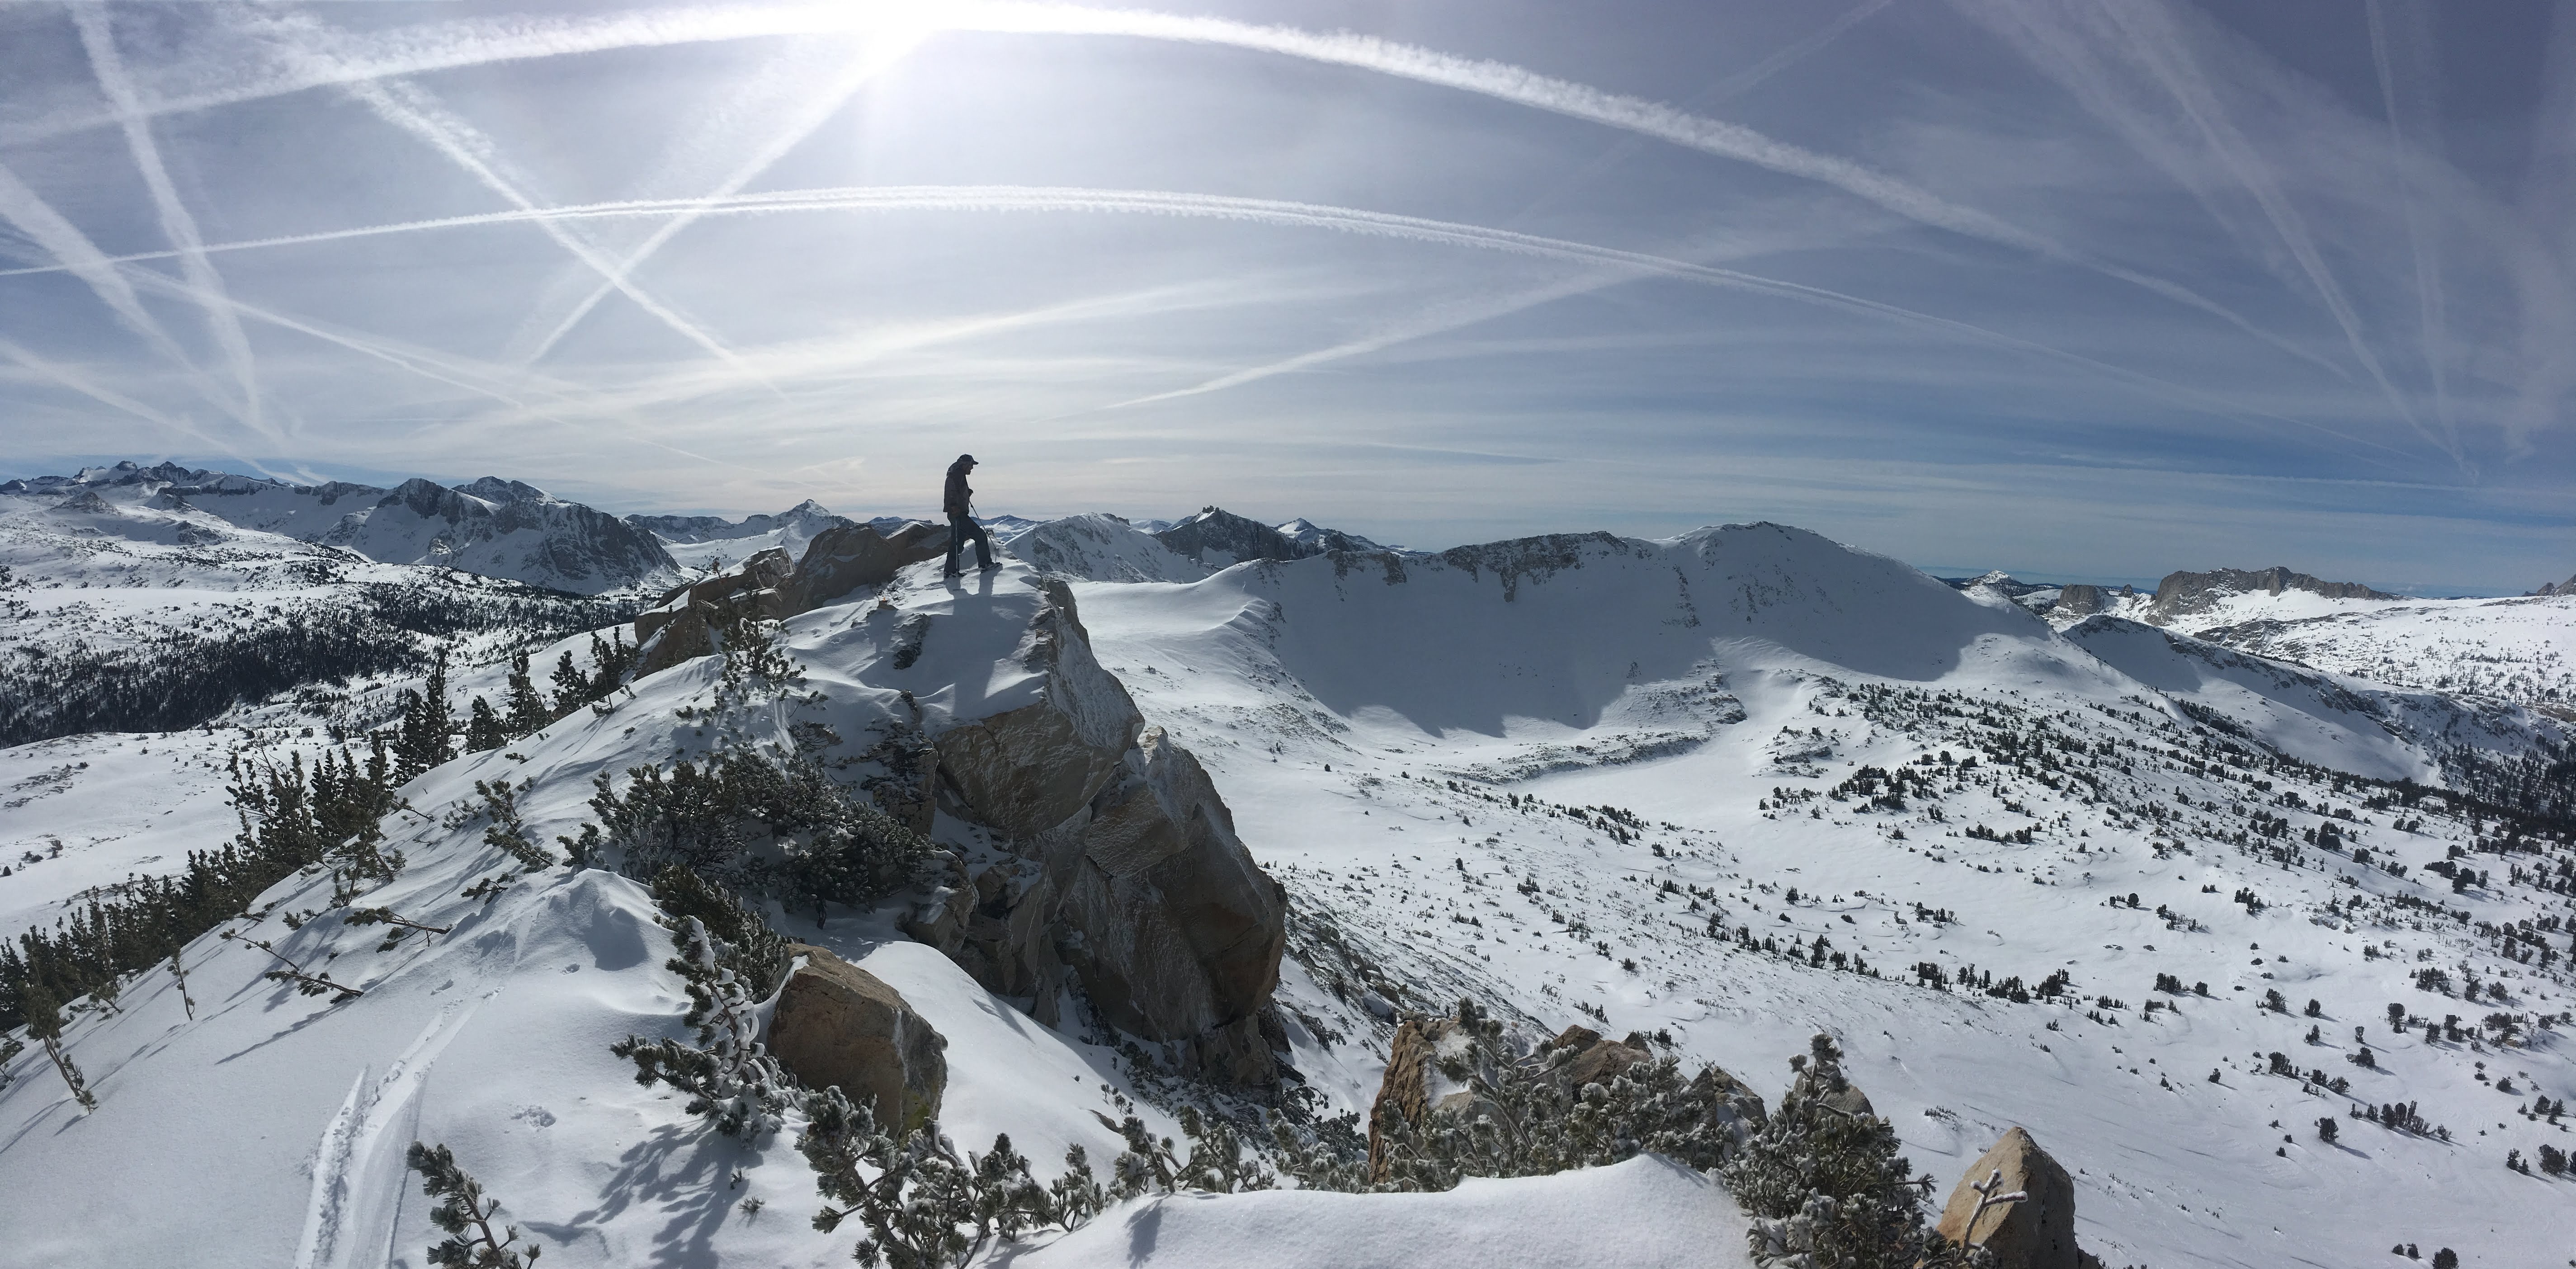 Single person stands on top of windswept snowy ridge